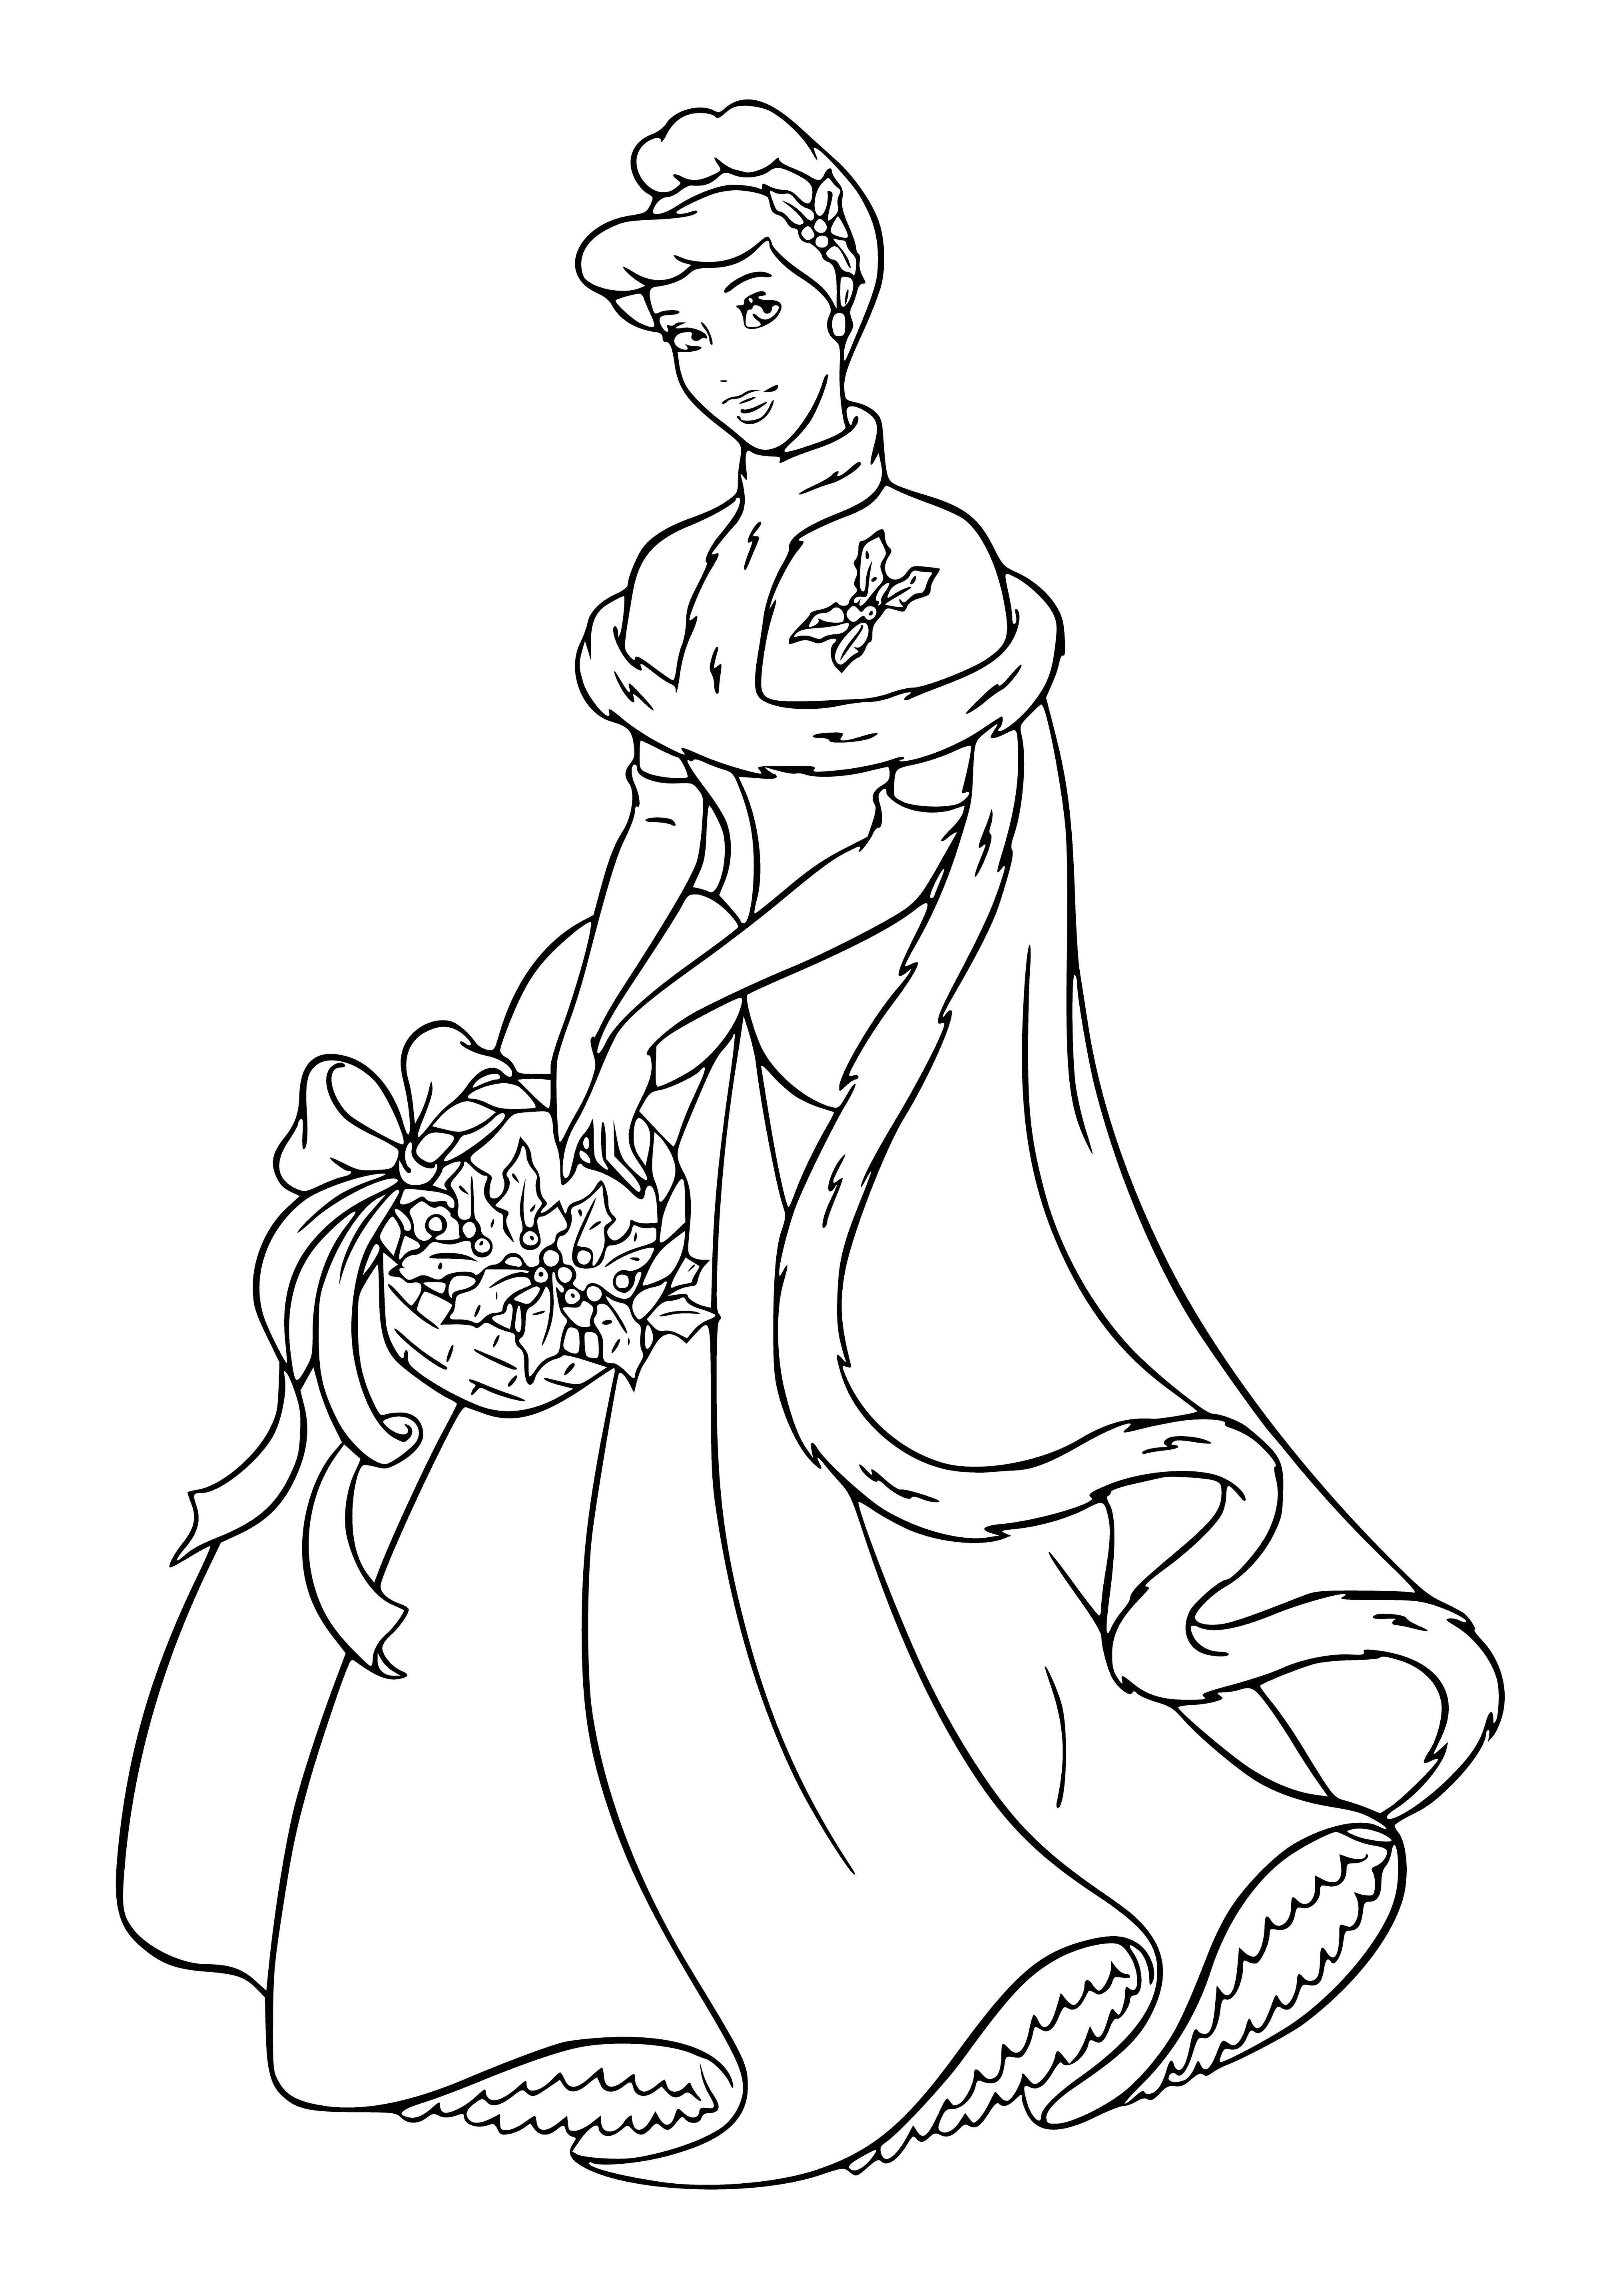 coloring page: The Disney princesses are gathered around a Christmas tree, smiling and celebrating. Cinderella is in the center holding a glass of champagne, looking happy for the new year. The other princesses are all around her, also smiling.